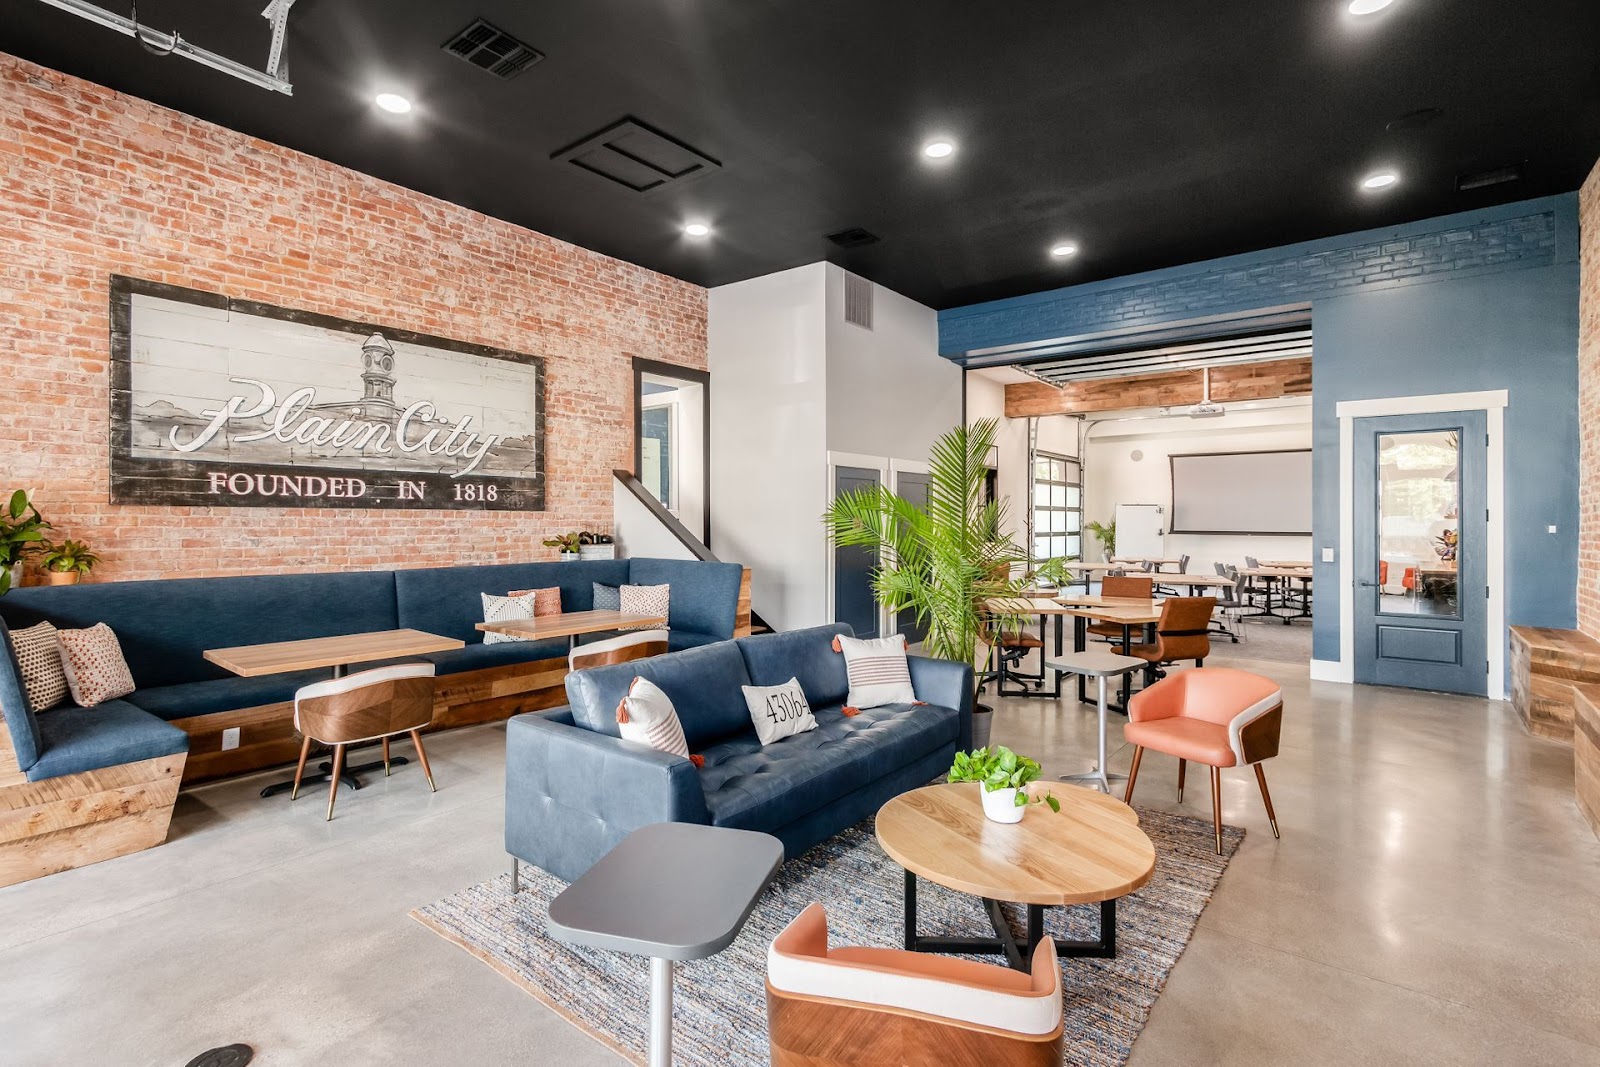 A modern event space with a cozy, welcoming atmosphere, featuring exposed brick walls and contemporary furniture. The wall art reads 'plain city, founded in 1818,' contributing to the room's historic charm. Blue upholstered bench seating, stylish armchairs, and wooden tables are thoughtfully arranged over an area rug, with a large plant adding a touch of greenery. The open space continues into another room with tables and chairs, suggesting a versatile area suitable for events and gatherings.